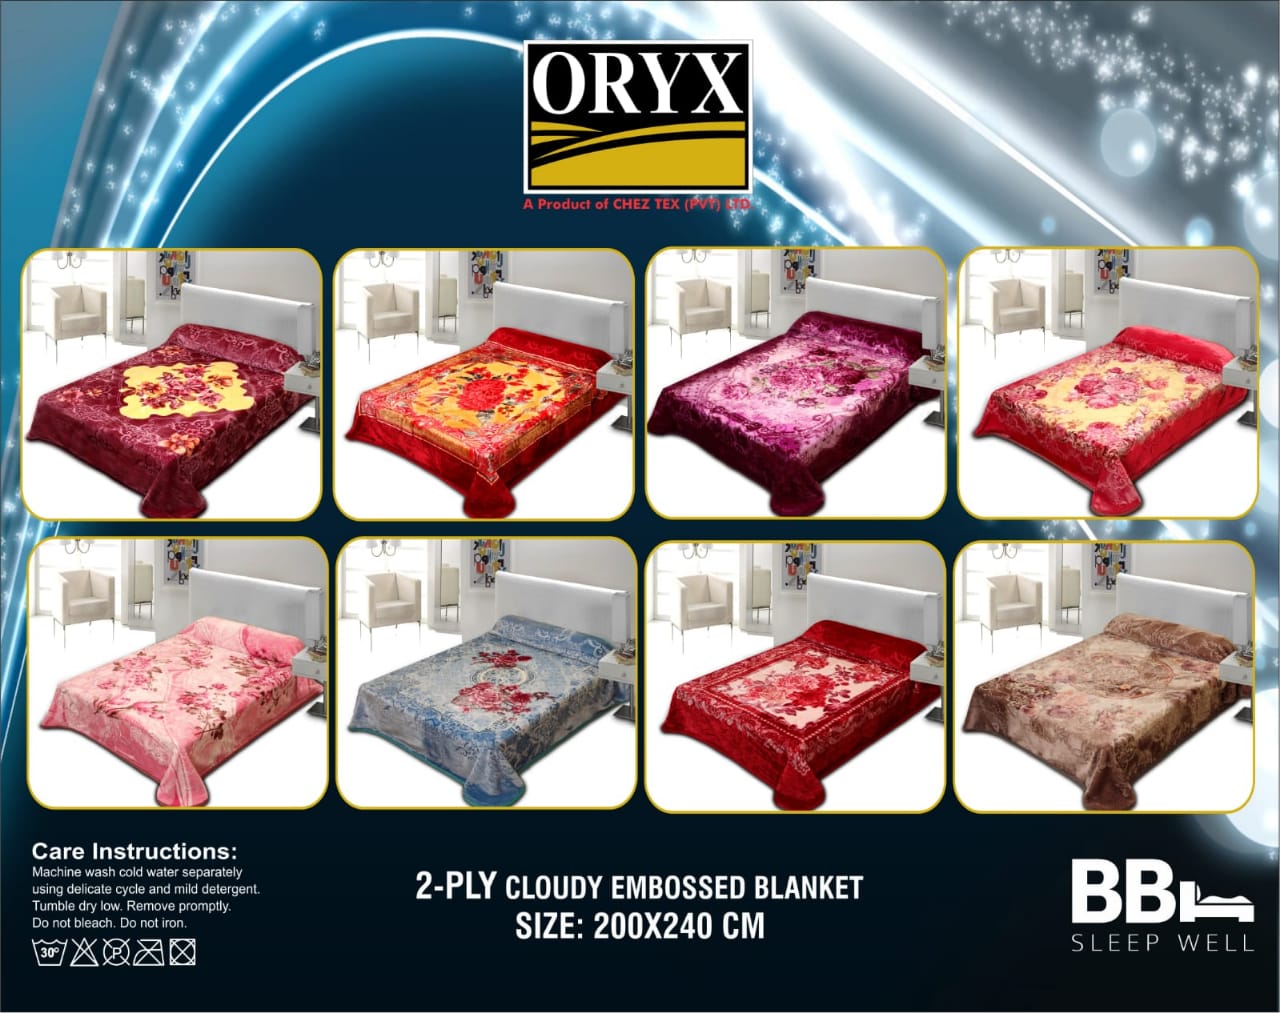 ORYX EMB  CLOUDY 2 PLY, 2 BED